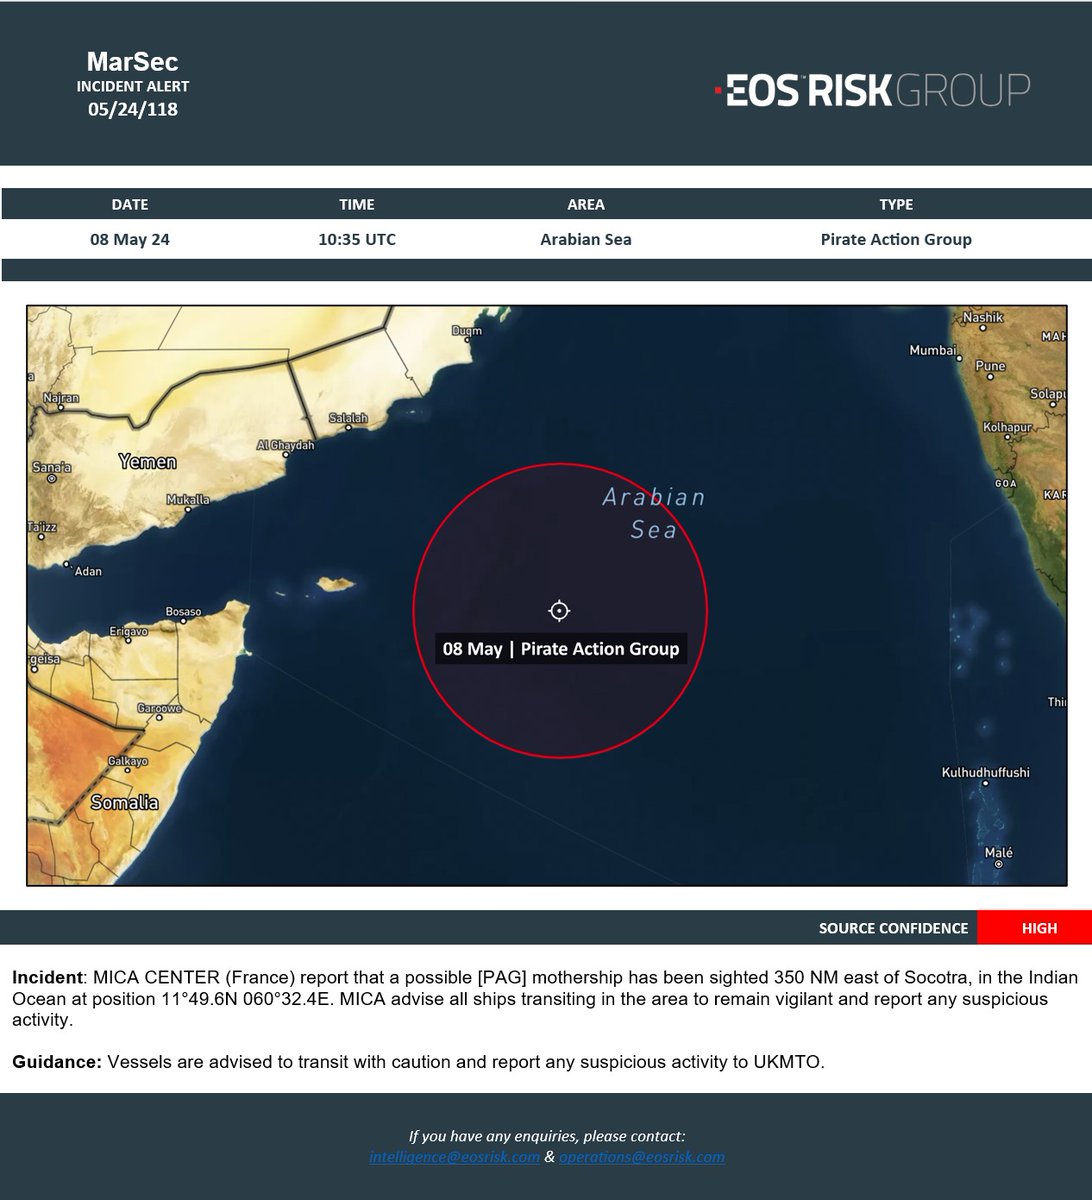 MARITIME SECURITY 🚨 ⚓️

Piracy - Indian Ocean

MICA Center reports possible PAG mothership sighted 350nm east of Socotra.

#security #mena #middleeast #maritime #maritimesecurity #shipsandshipping #shippingindustry #maritimeindustry #piracy #somalia

#indianocean